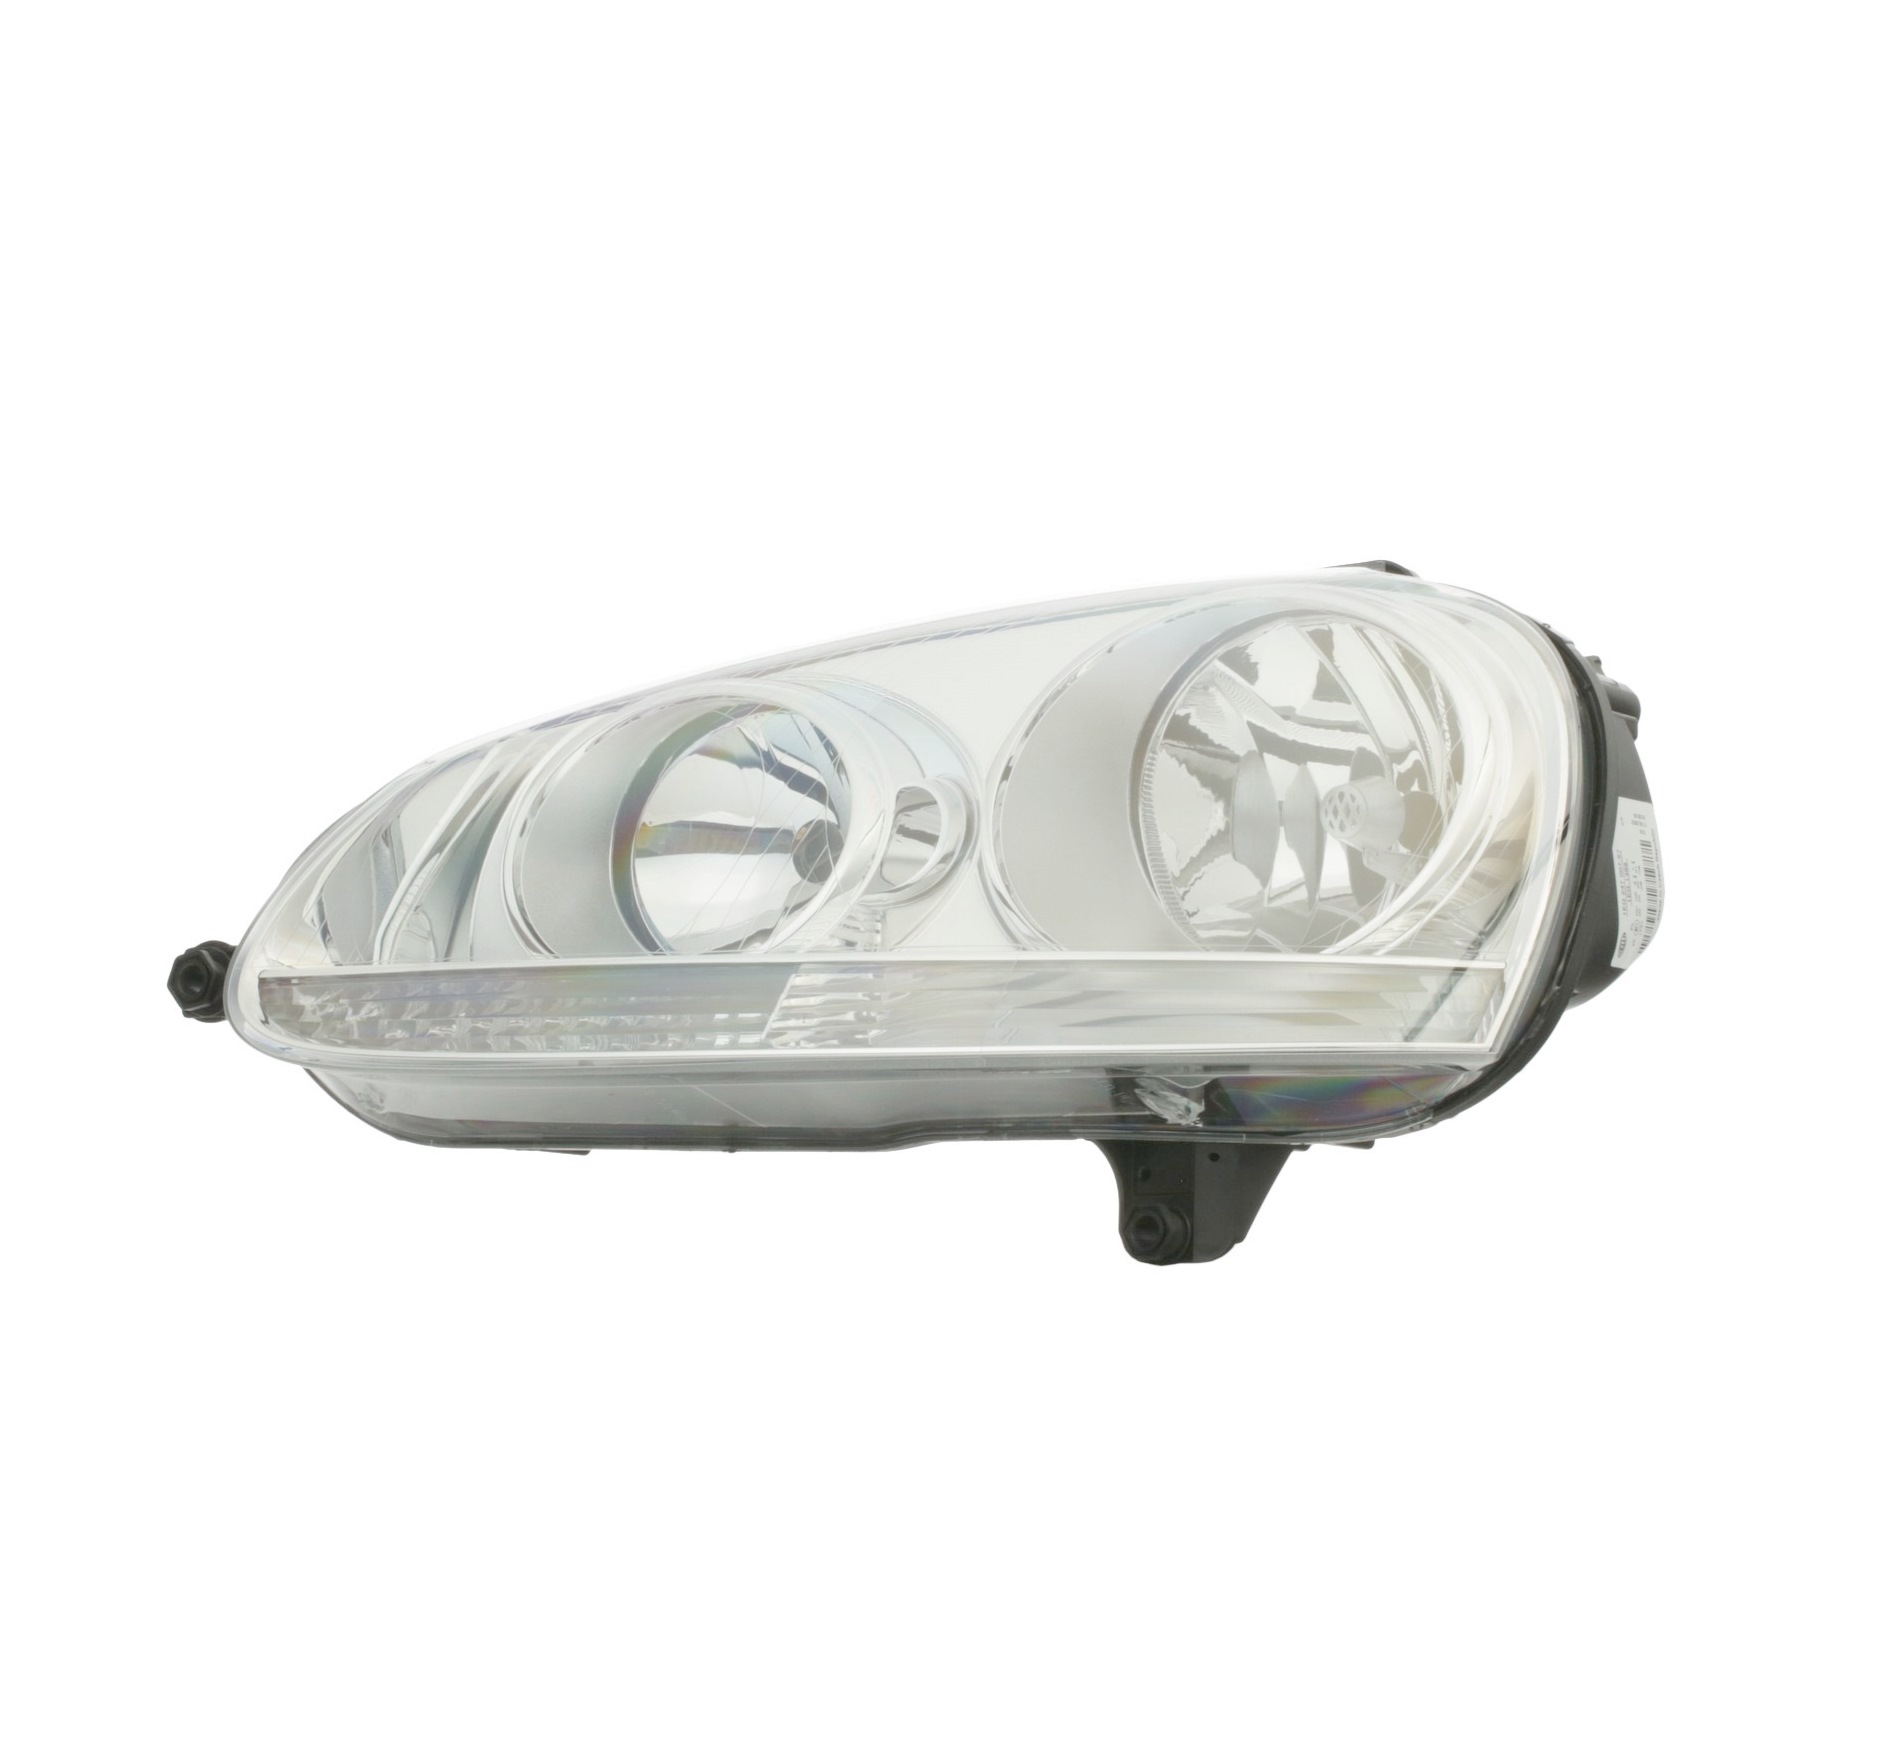 HELLA 1EG 247 007-571 Headlight Left, W5W, H7/H7, PY21W, Halogen, 12V, white, with low beam, with high beam, with indicator, with position light, for right-hand traffic, without bulb holder, with motor for headlamp levelling, without bulbs